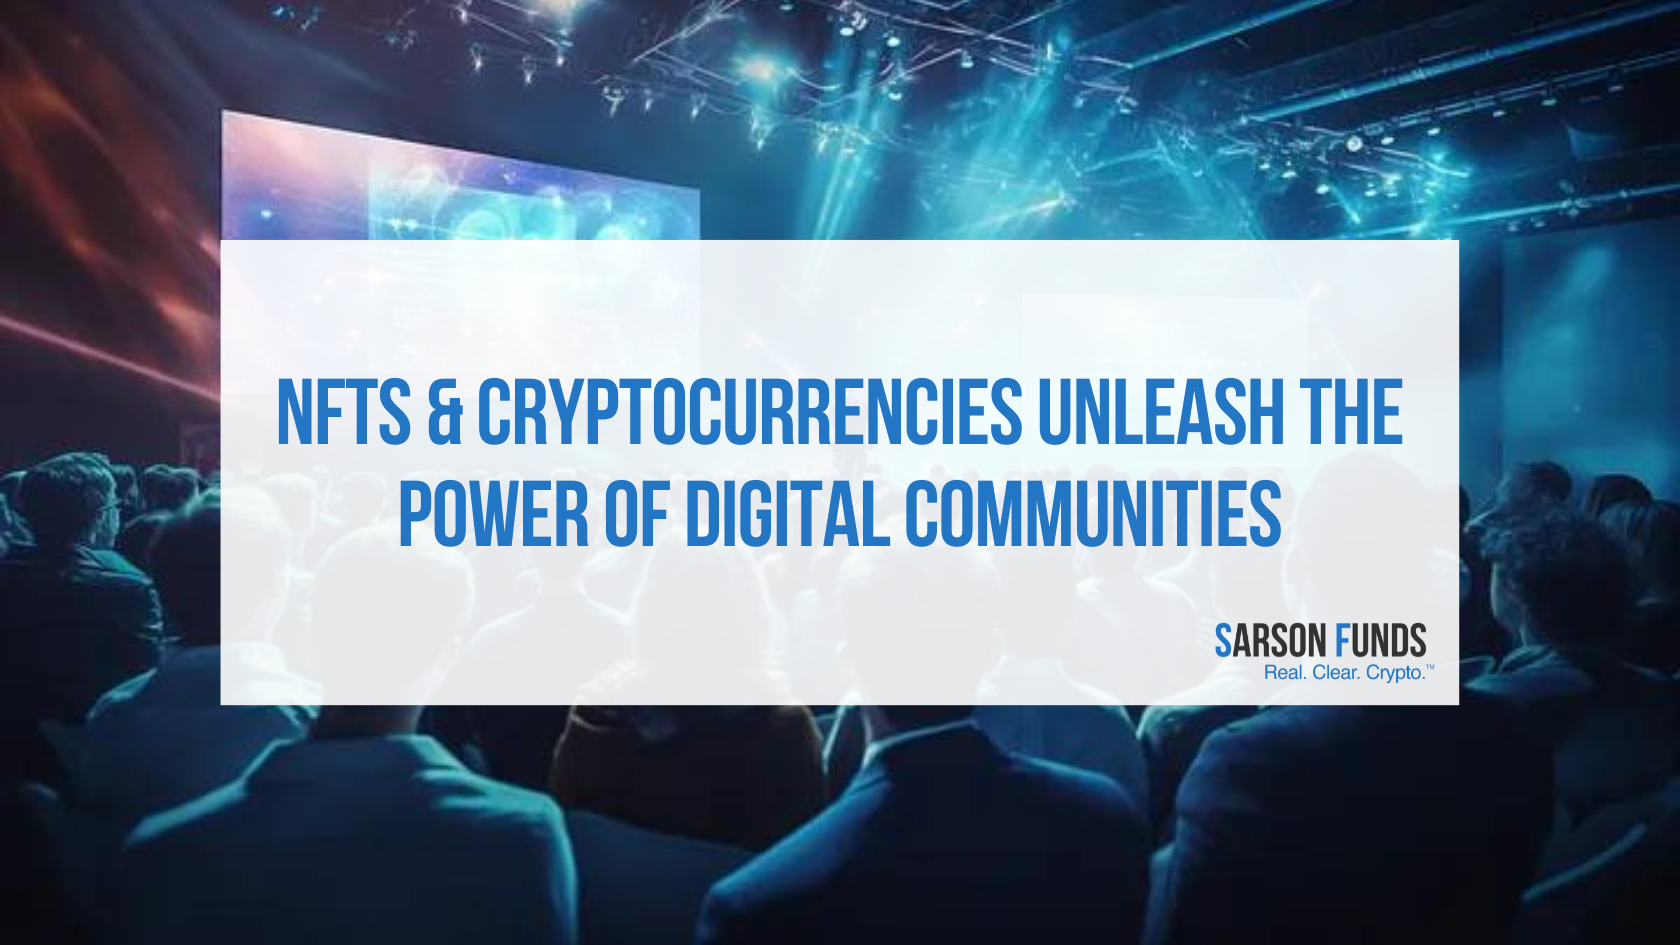 NFTs & Cryptocurrencies Unleash the Power of Digital Communities